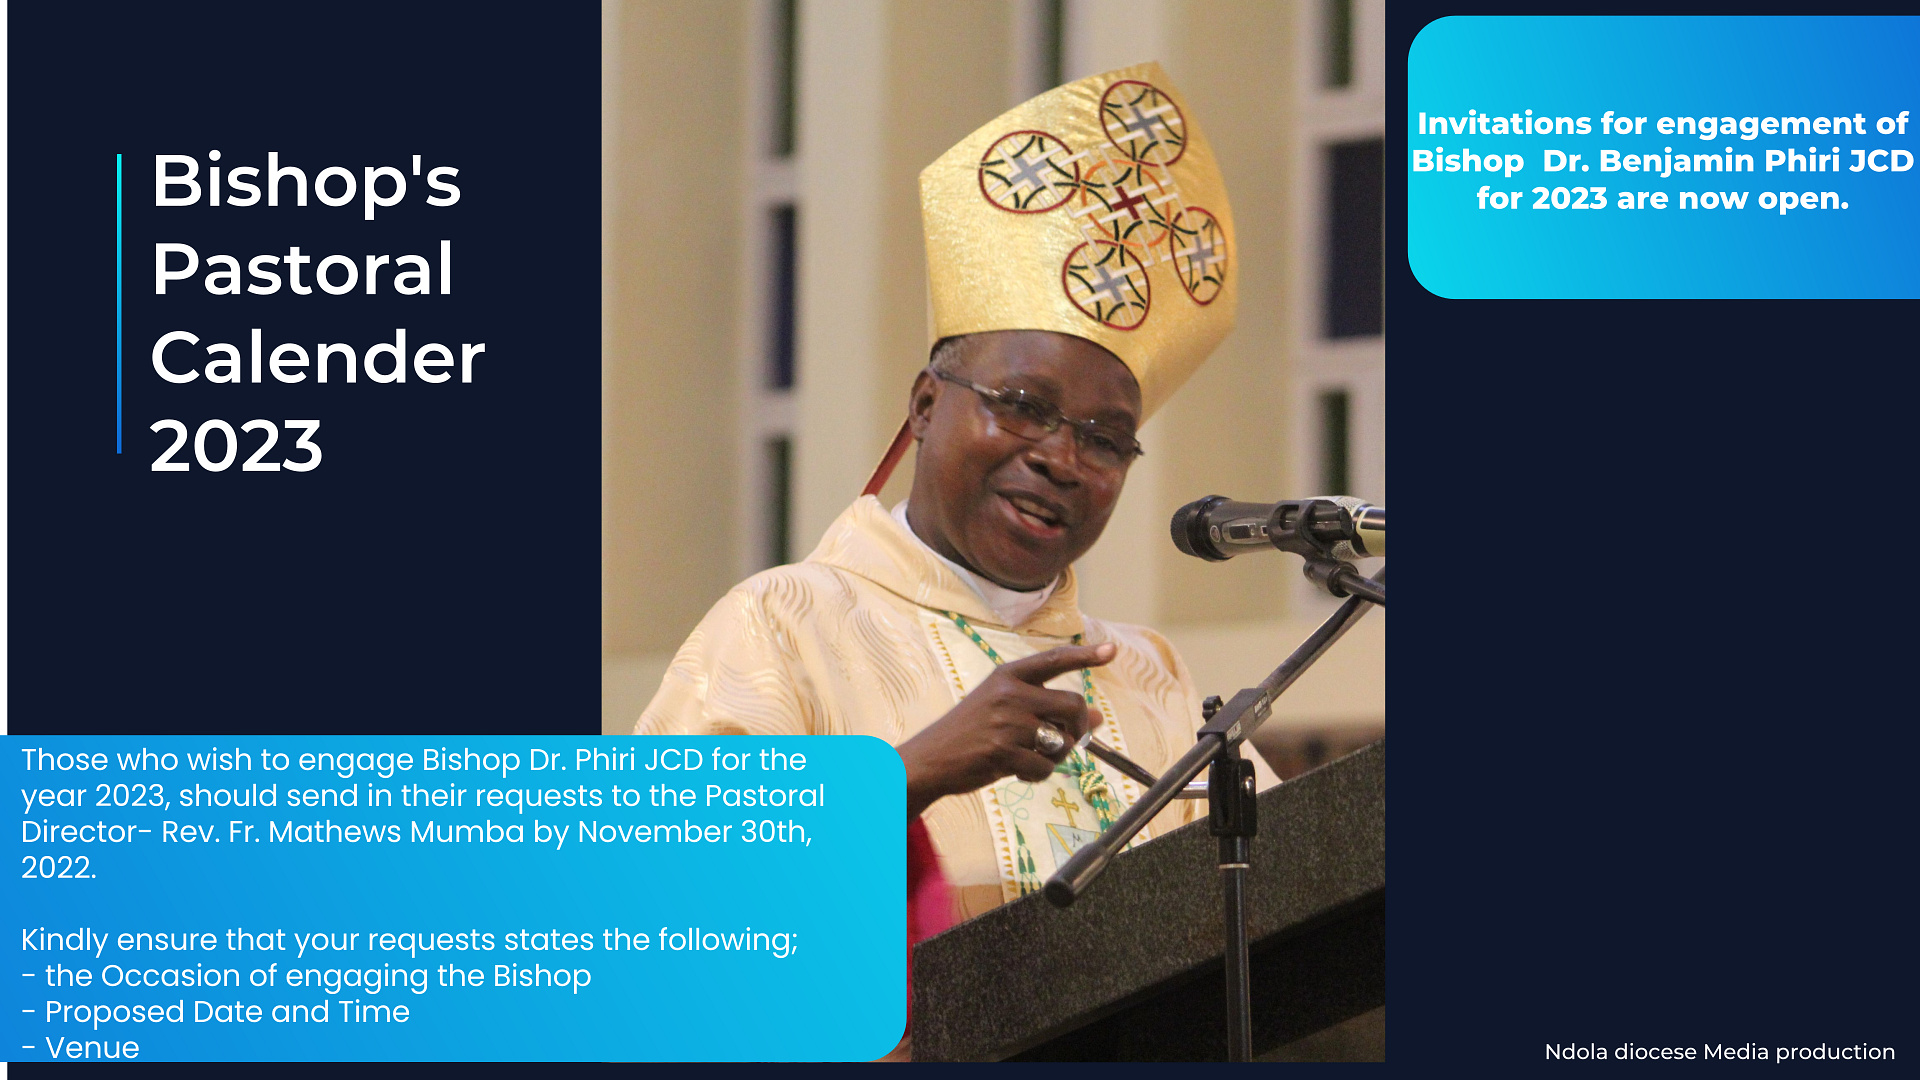 Invitations to engage Bishop Dr. Benjamin Phiri JCD for the year 2023 are now open.